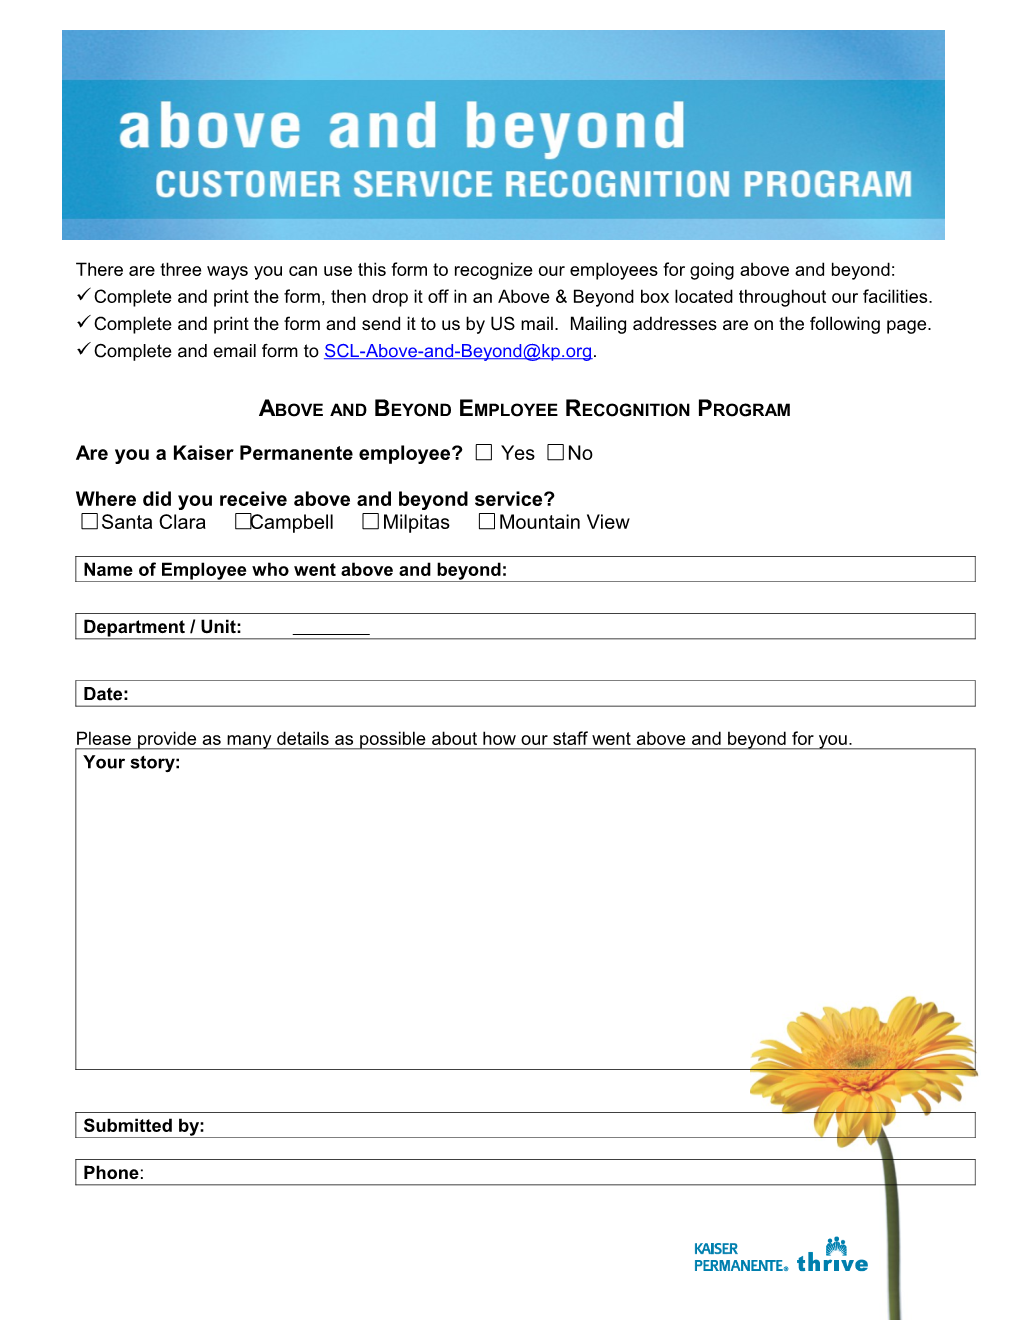 Above and Beyond Employee Recognition Program